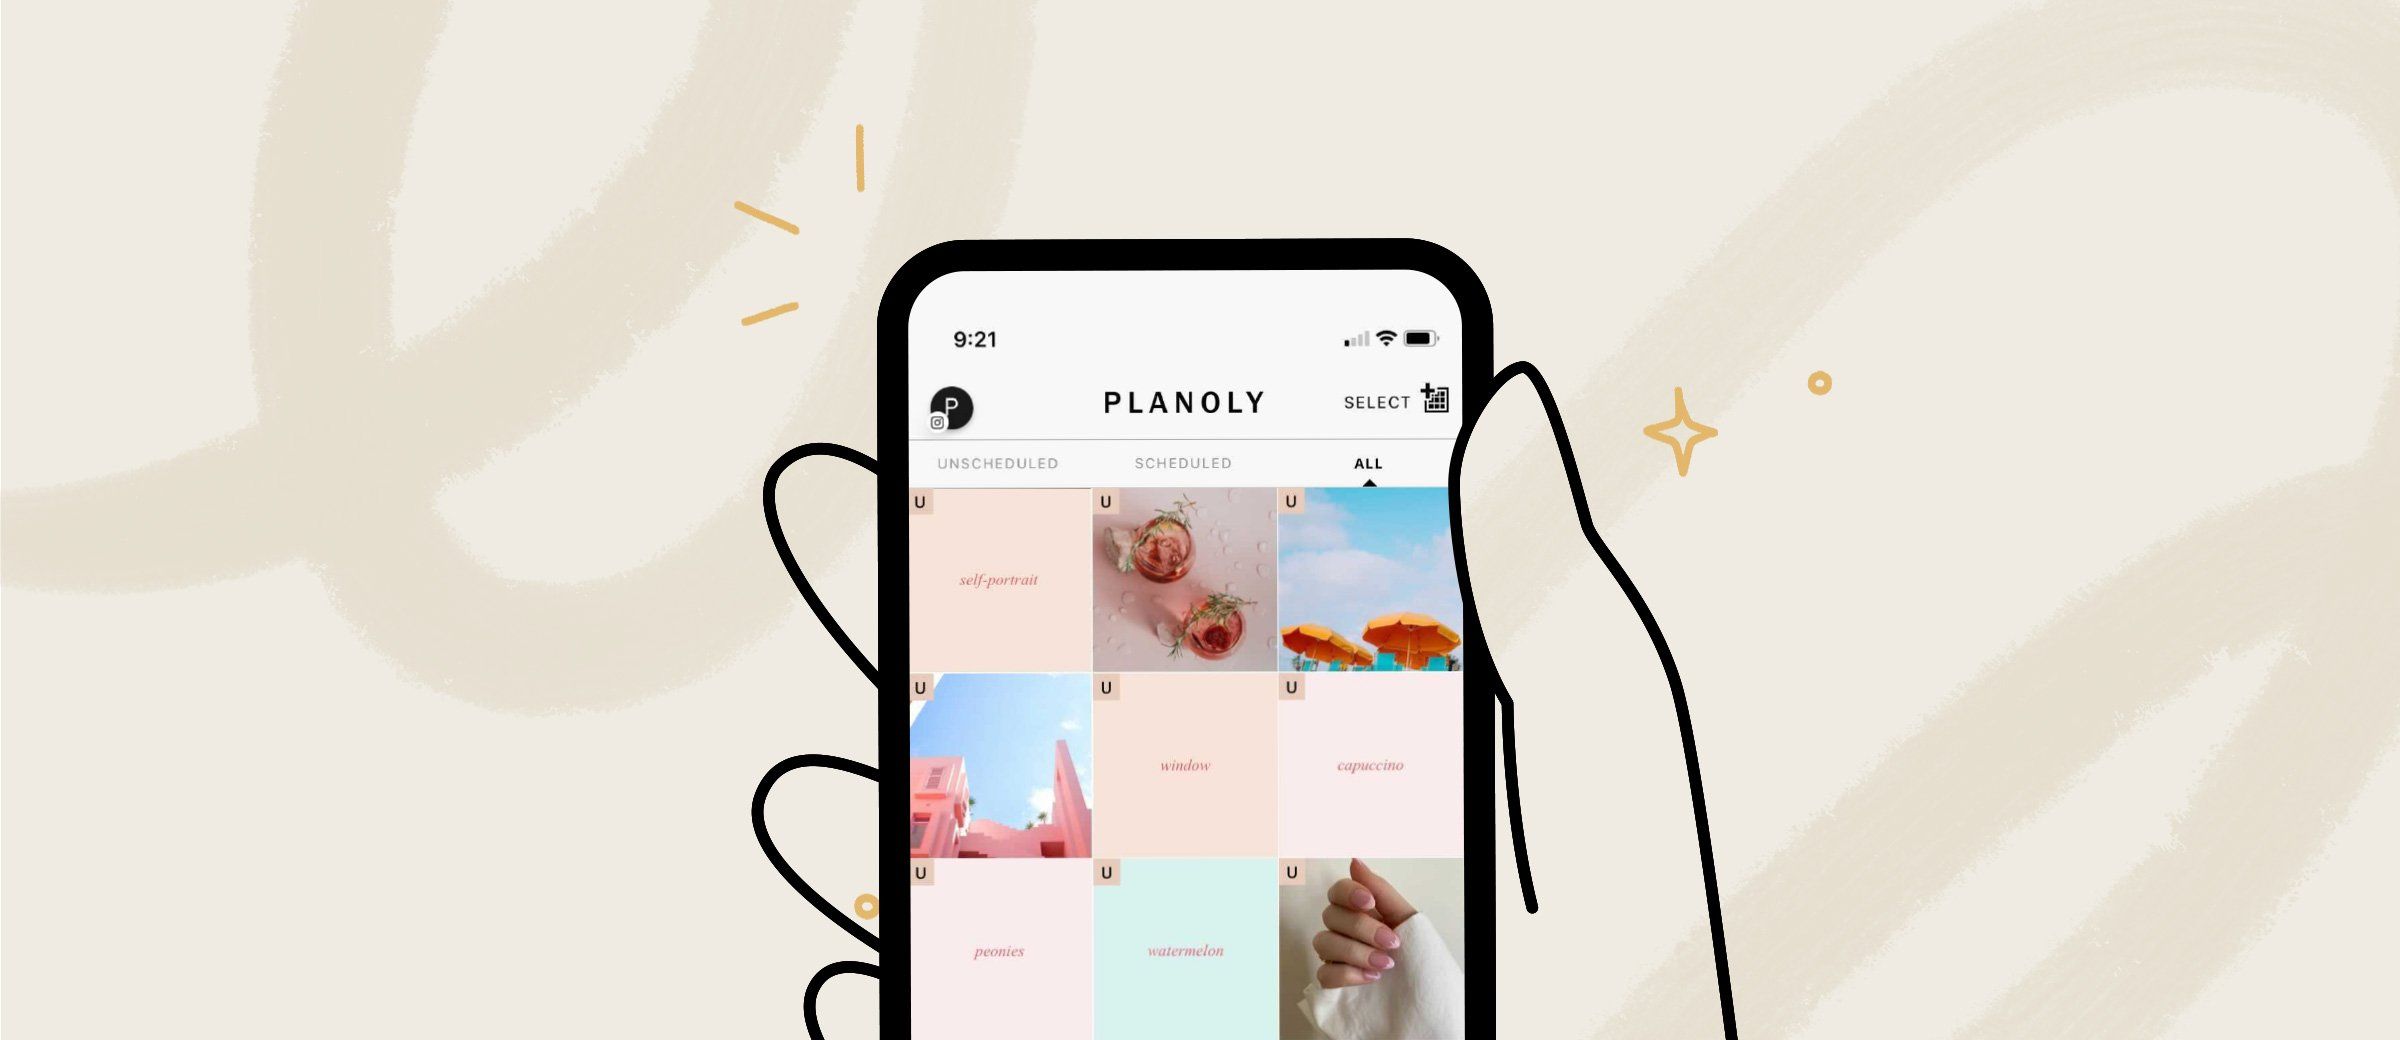 How to Use PLANOLY's Placeholder Feature, by lindsay-campbell